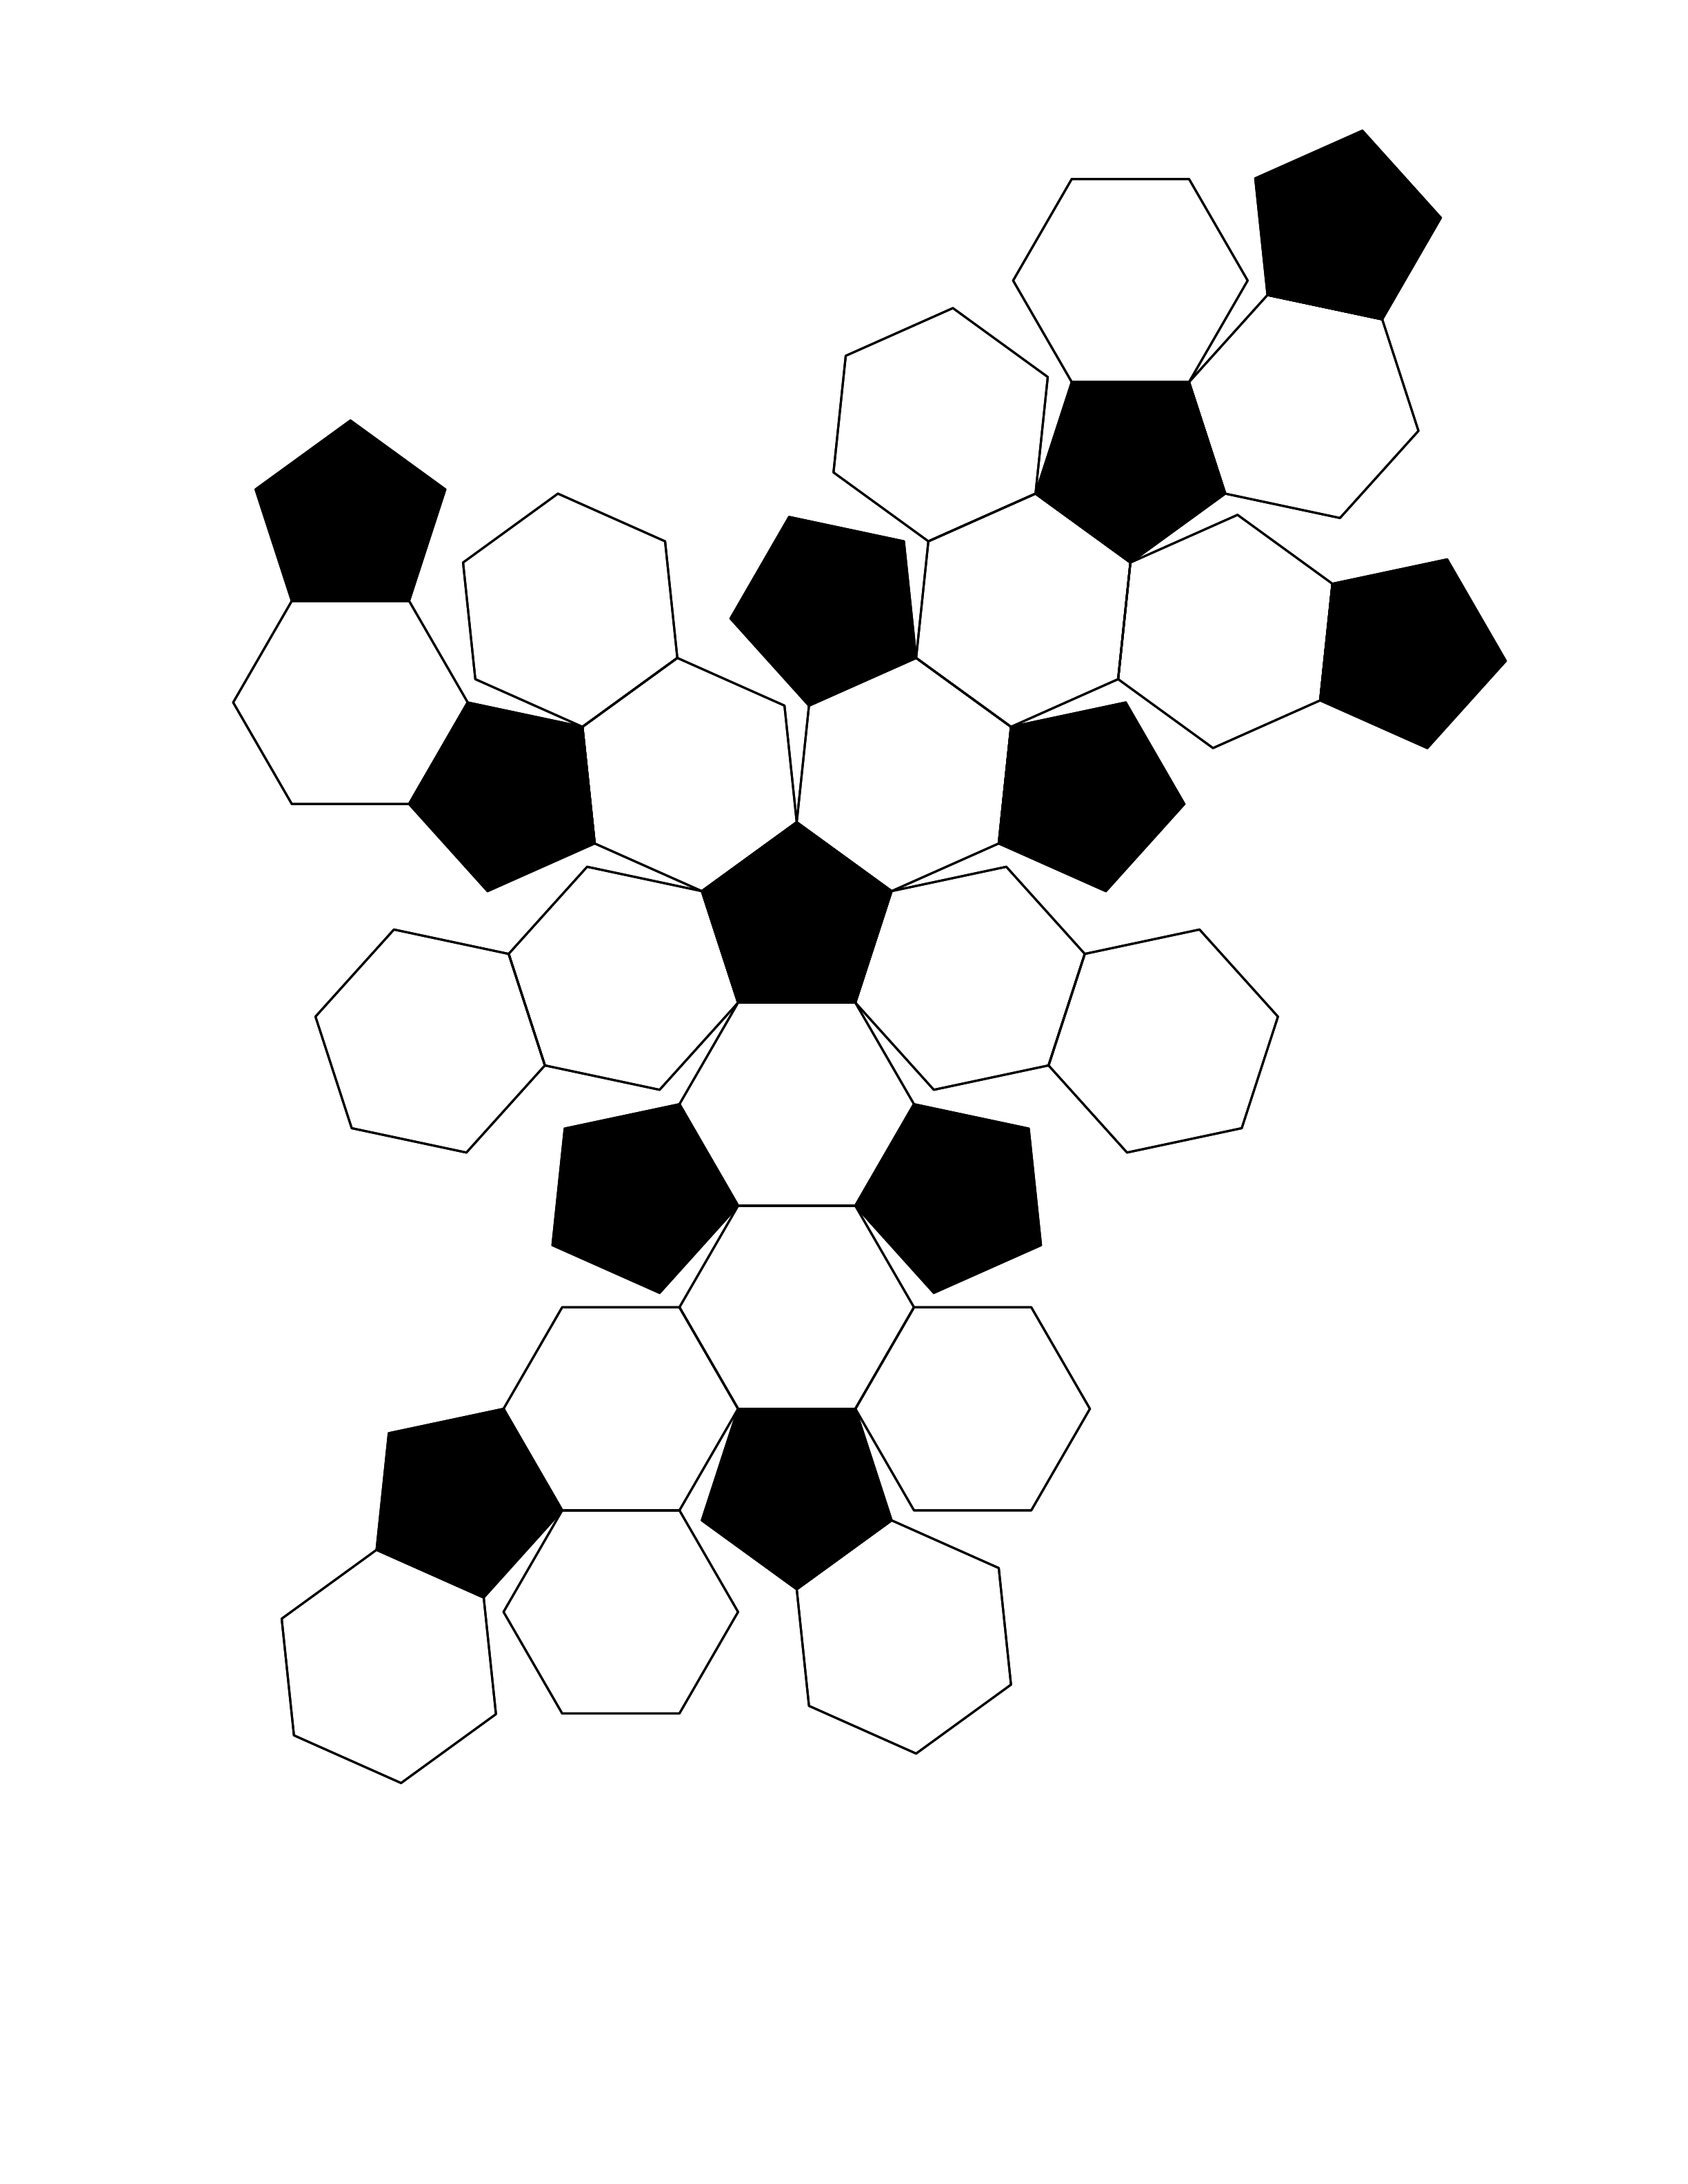 cut open soccer ball, looks like a cluster of black pentagons and white hexagons.